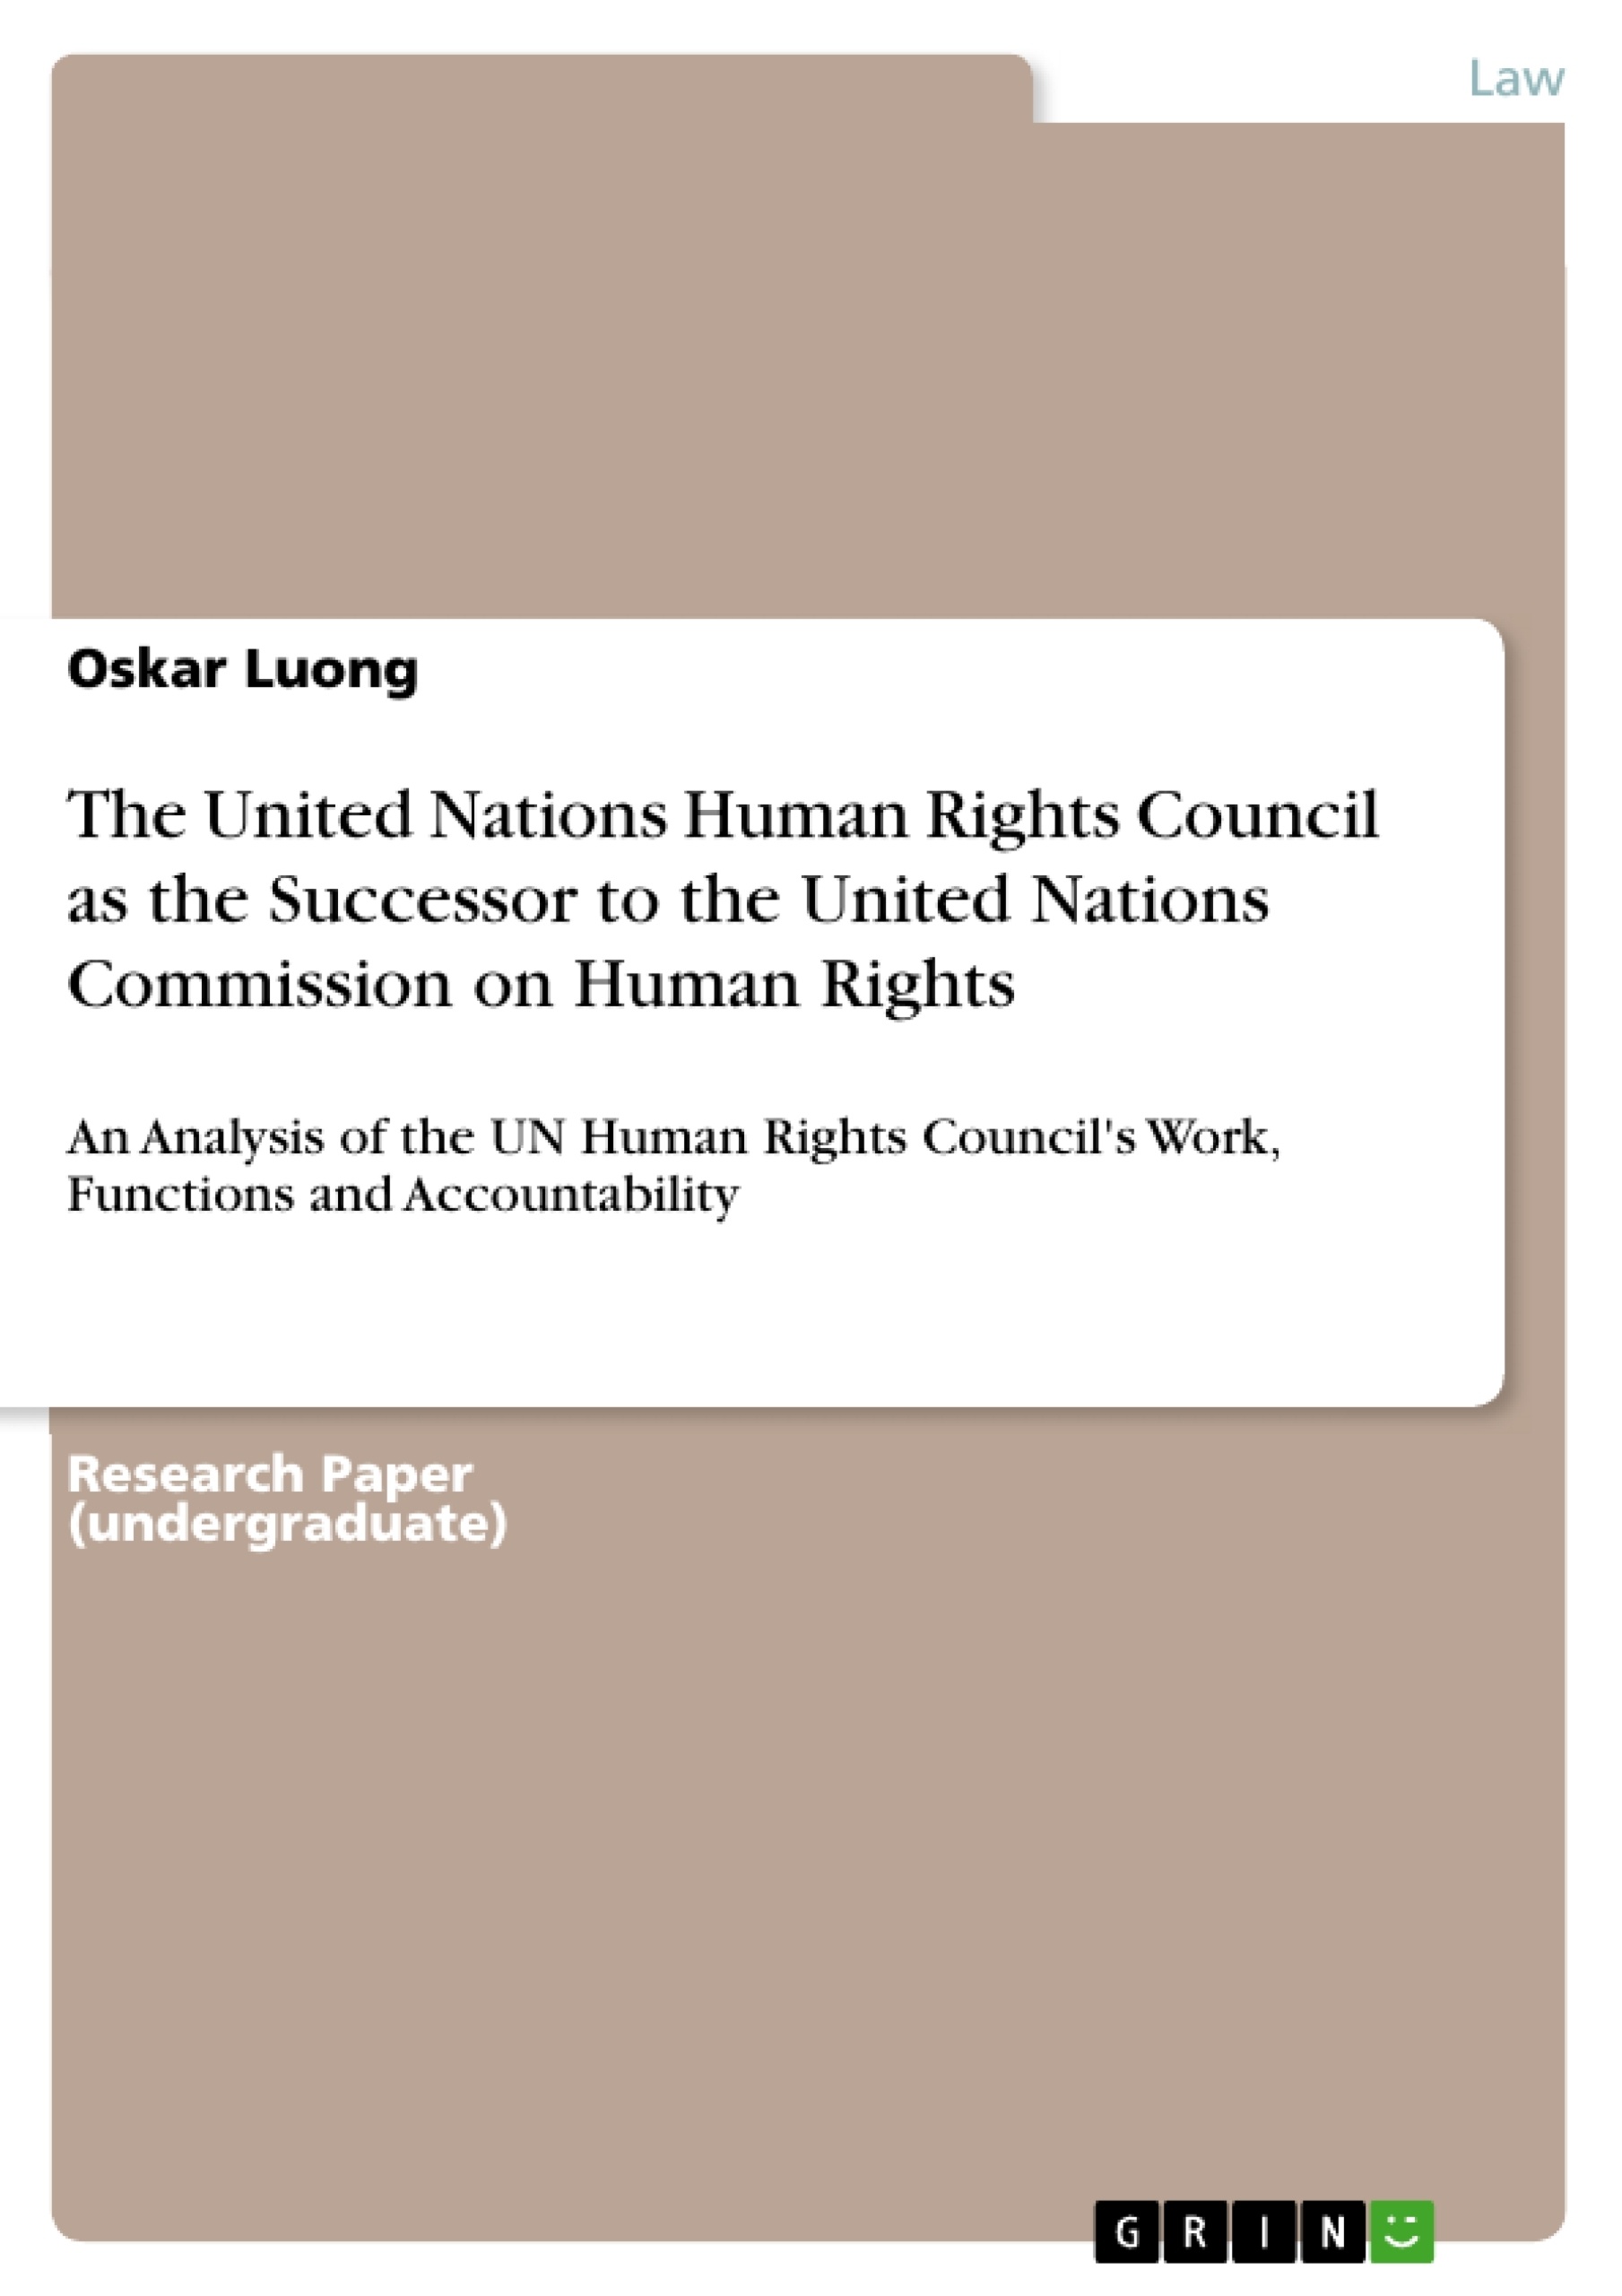 Titel: The United Nations Human Rights Council as the Successor to the United Nations Commission on Human Rights